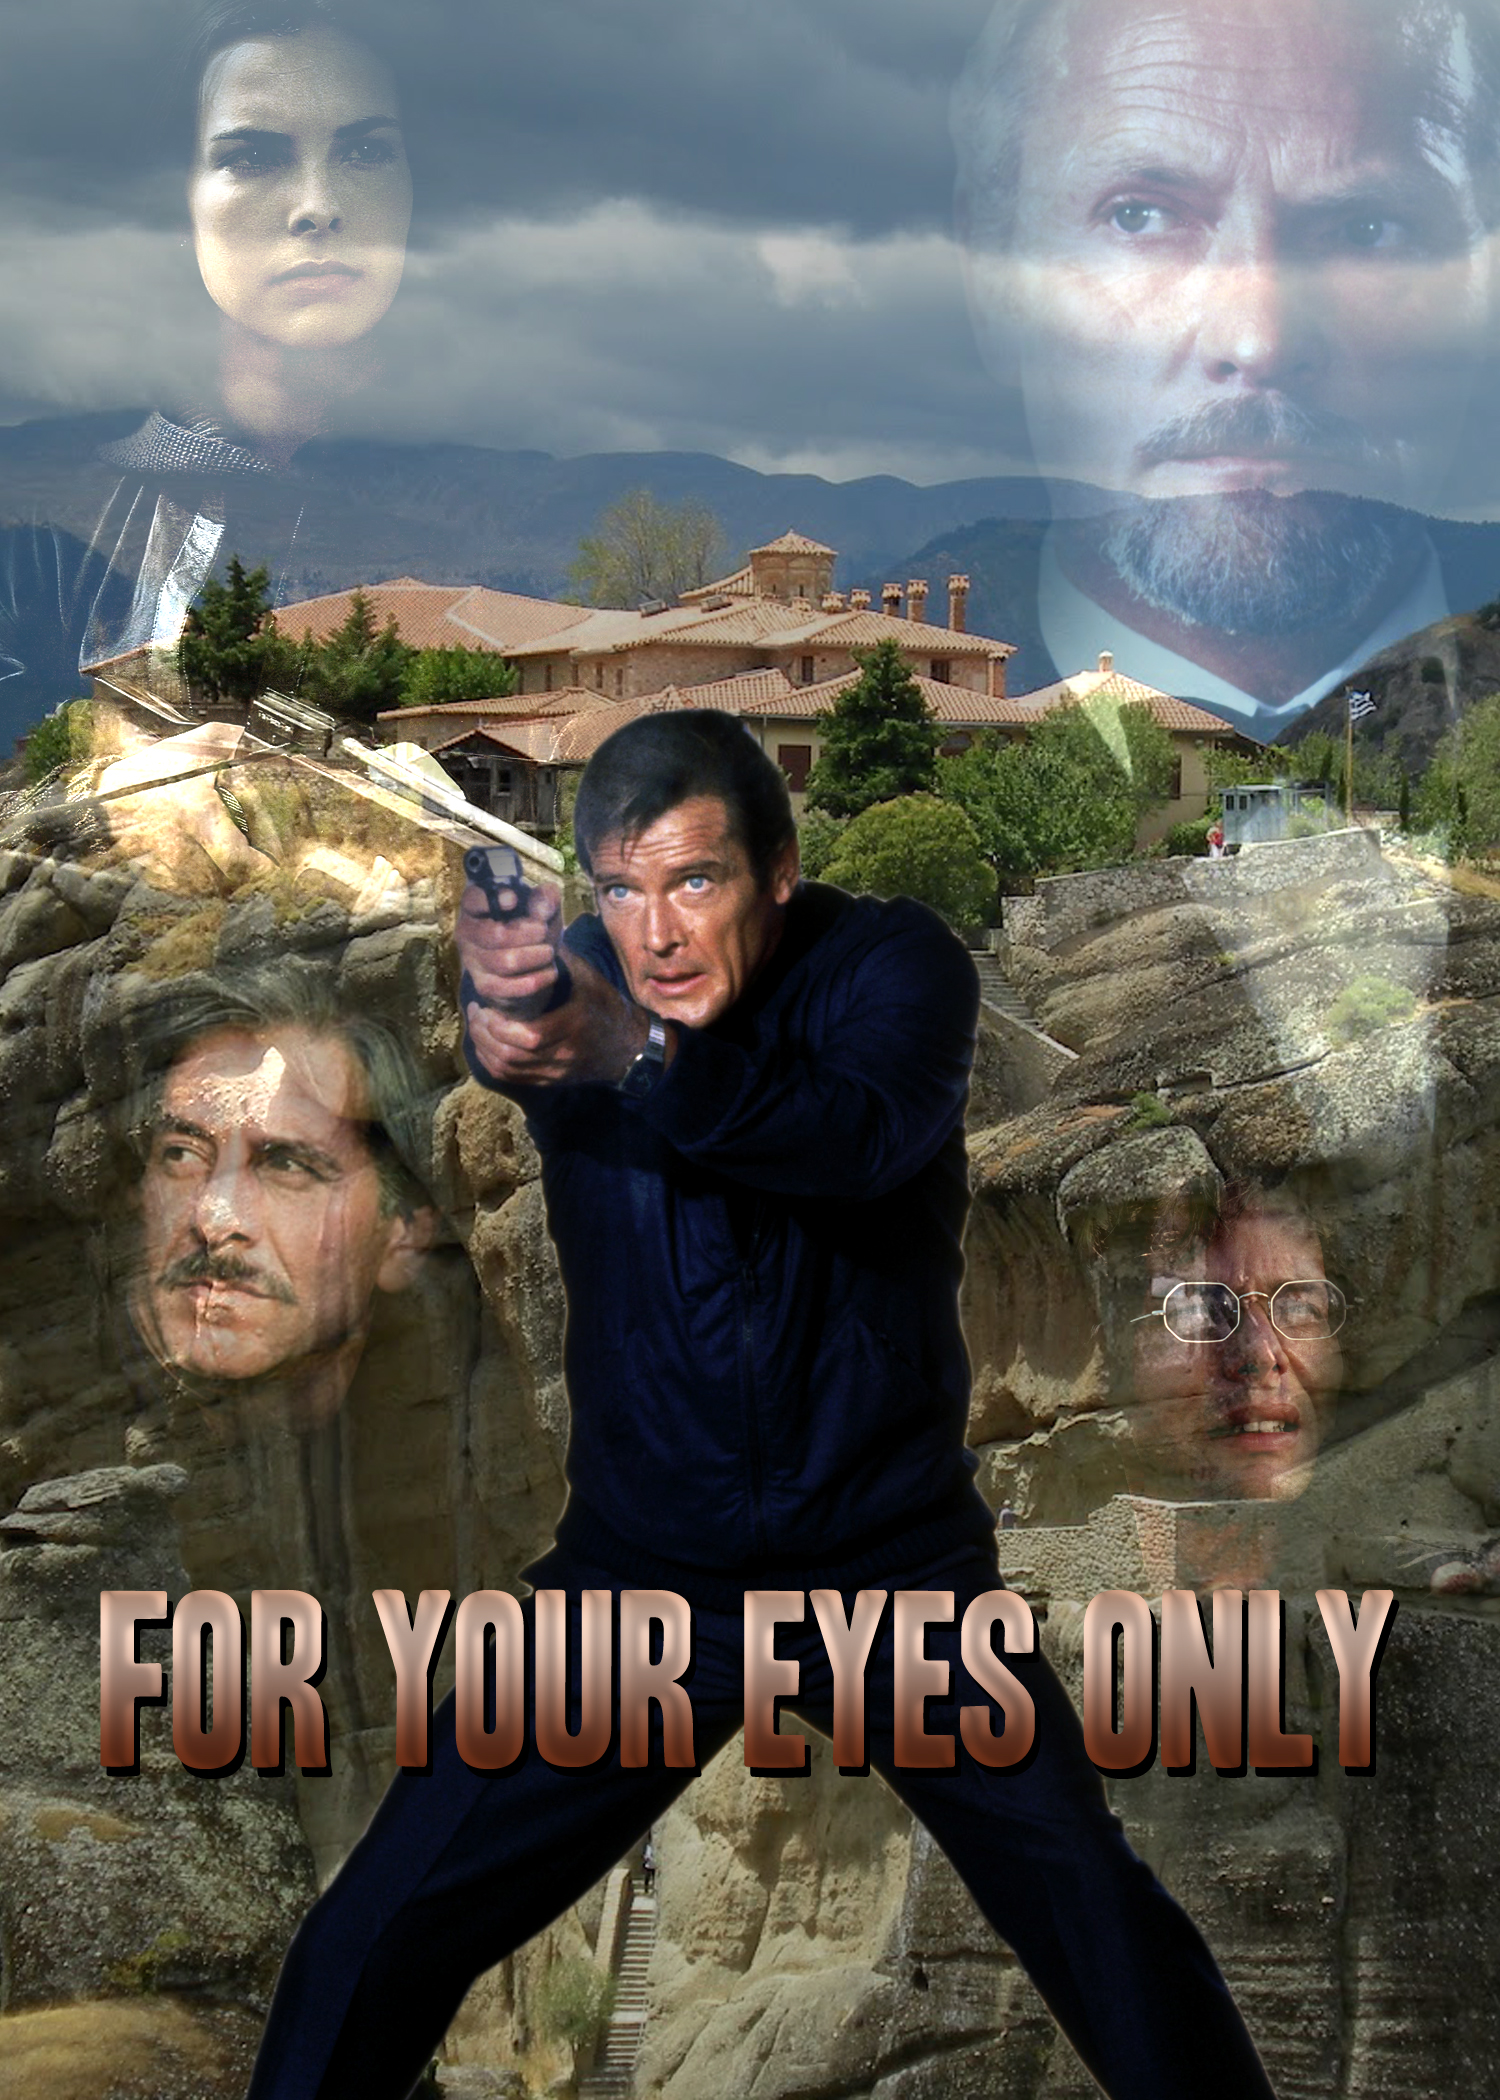 for_your_eyes_only_poster_by_comandercool22-d68c8c7.jpg